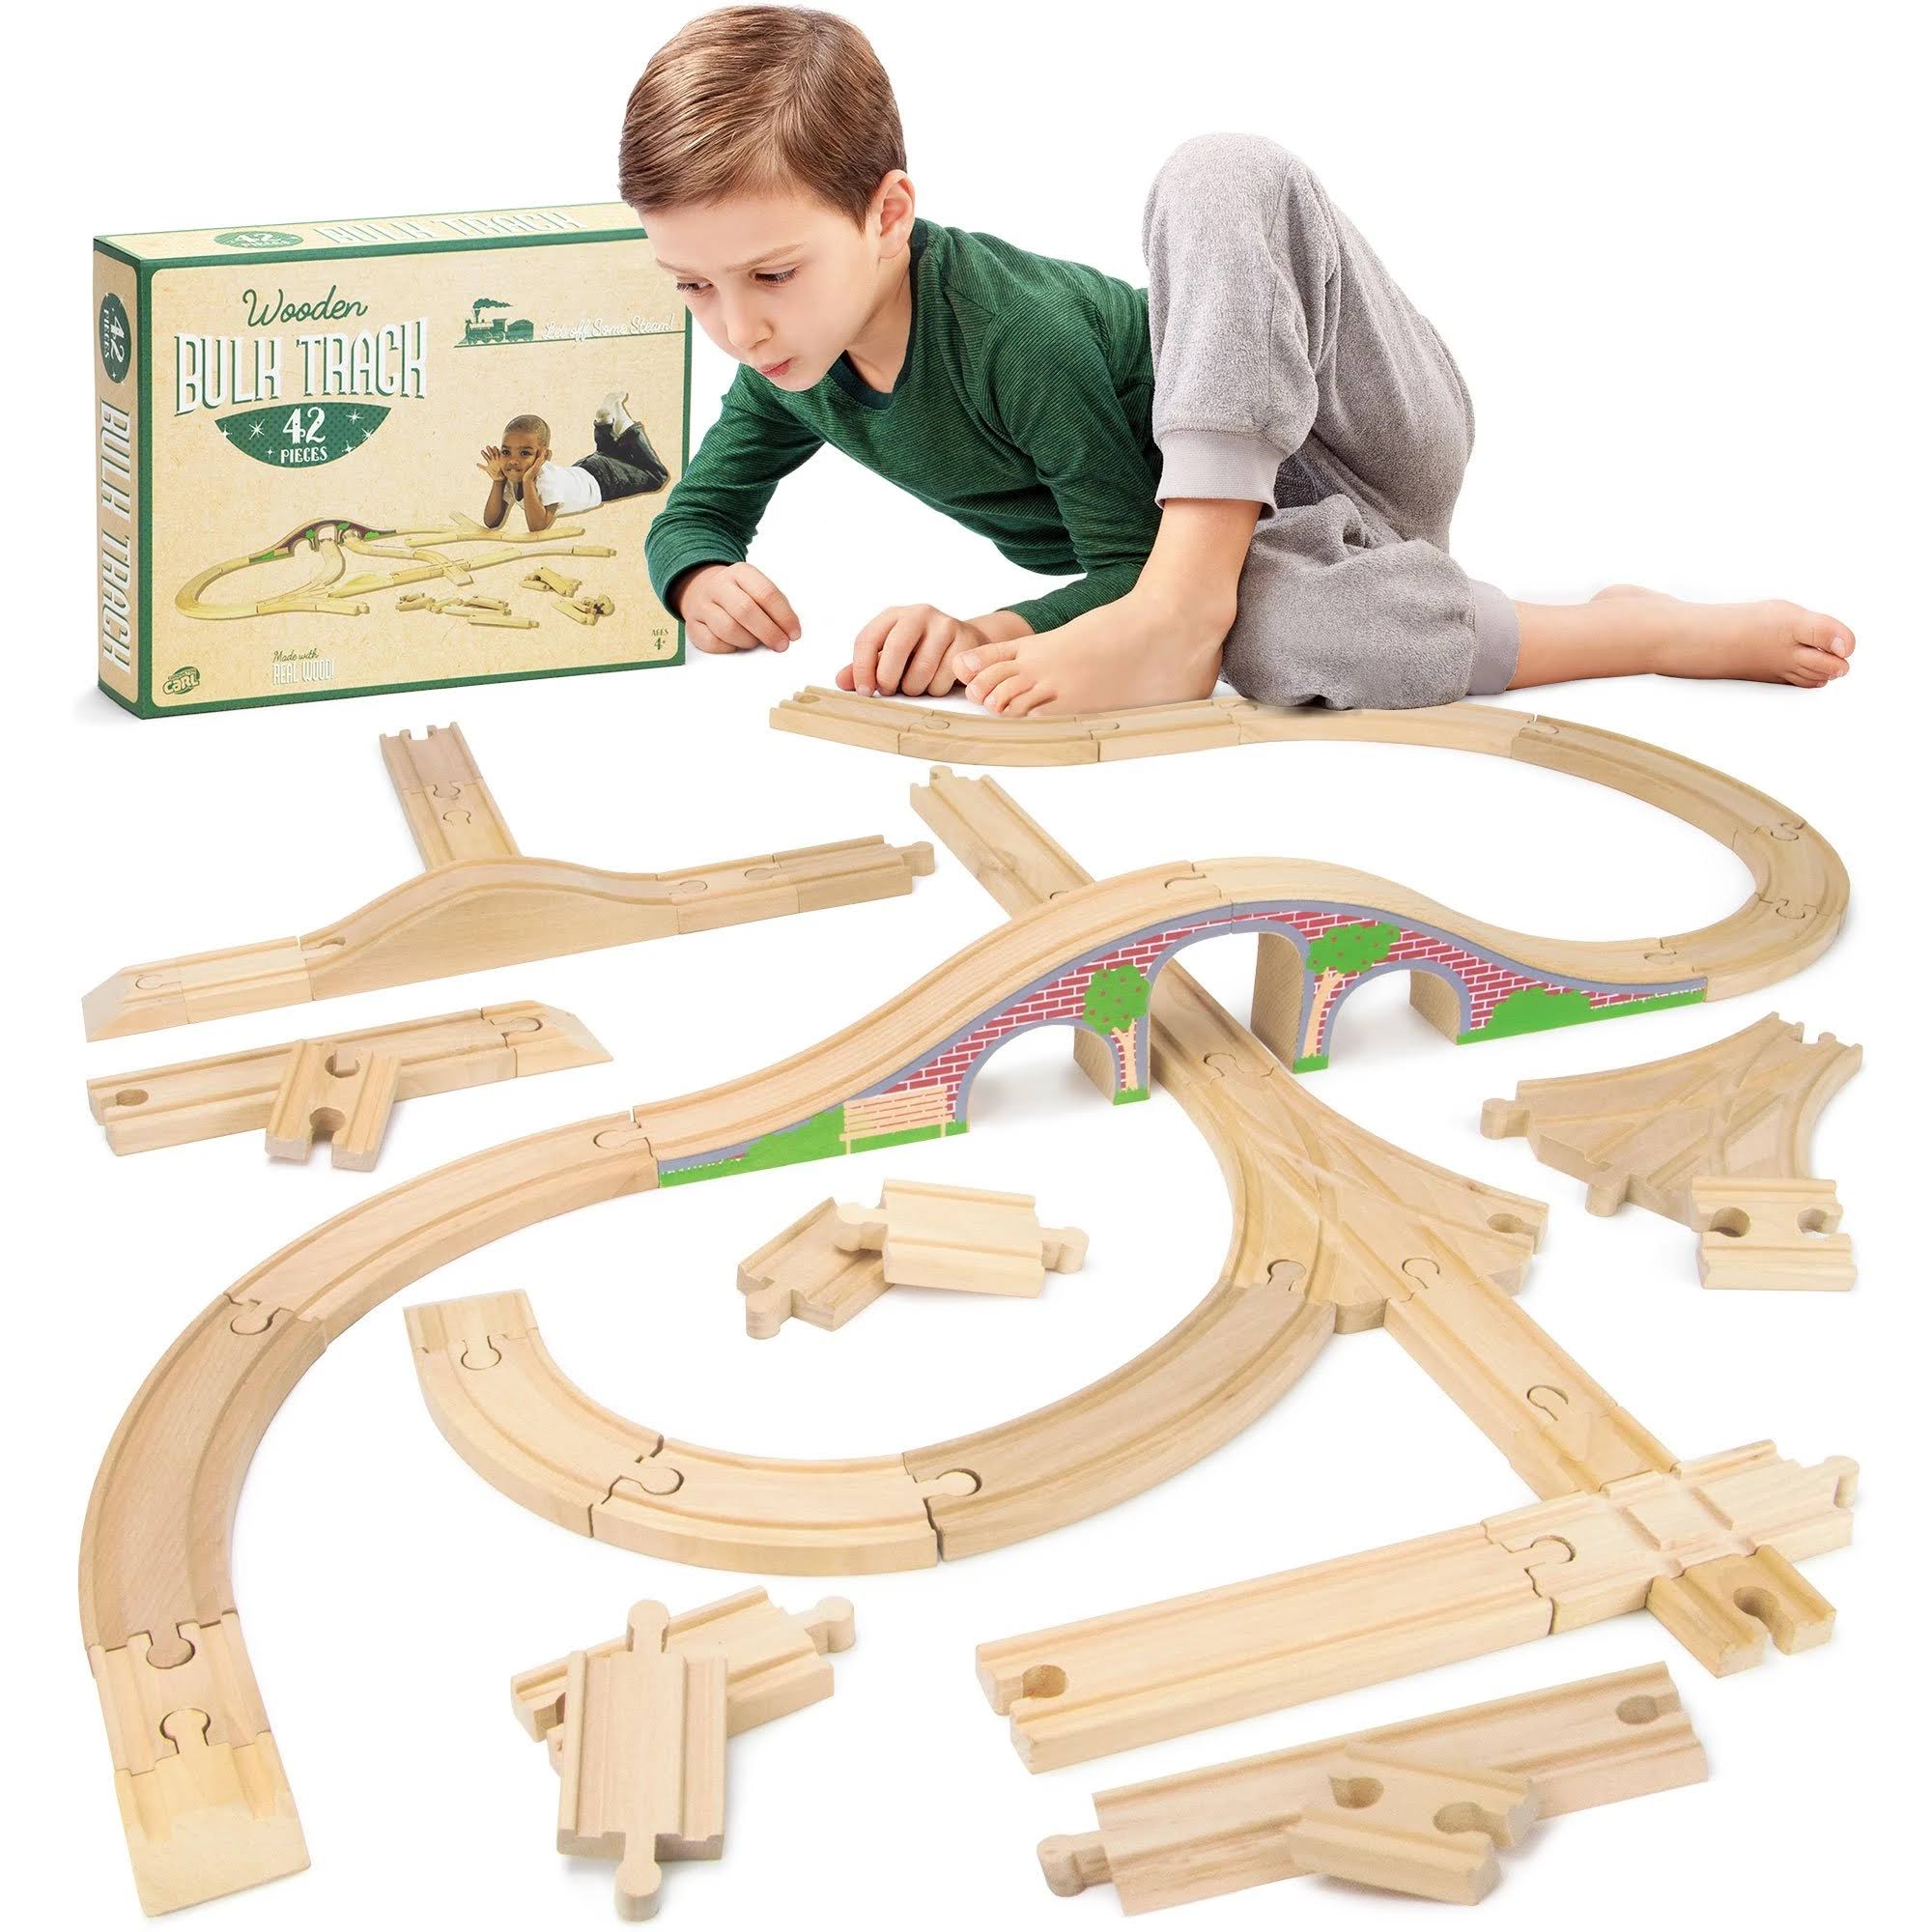 Wooden Bulk Track, 42 Pieces - Play Train Set Booster Pack with Red Br